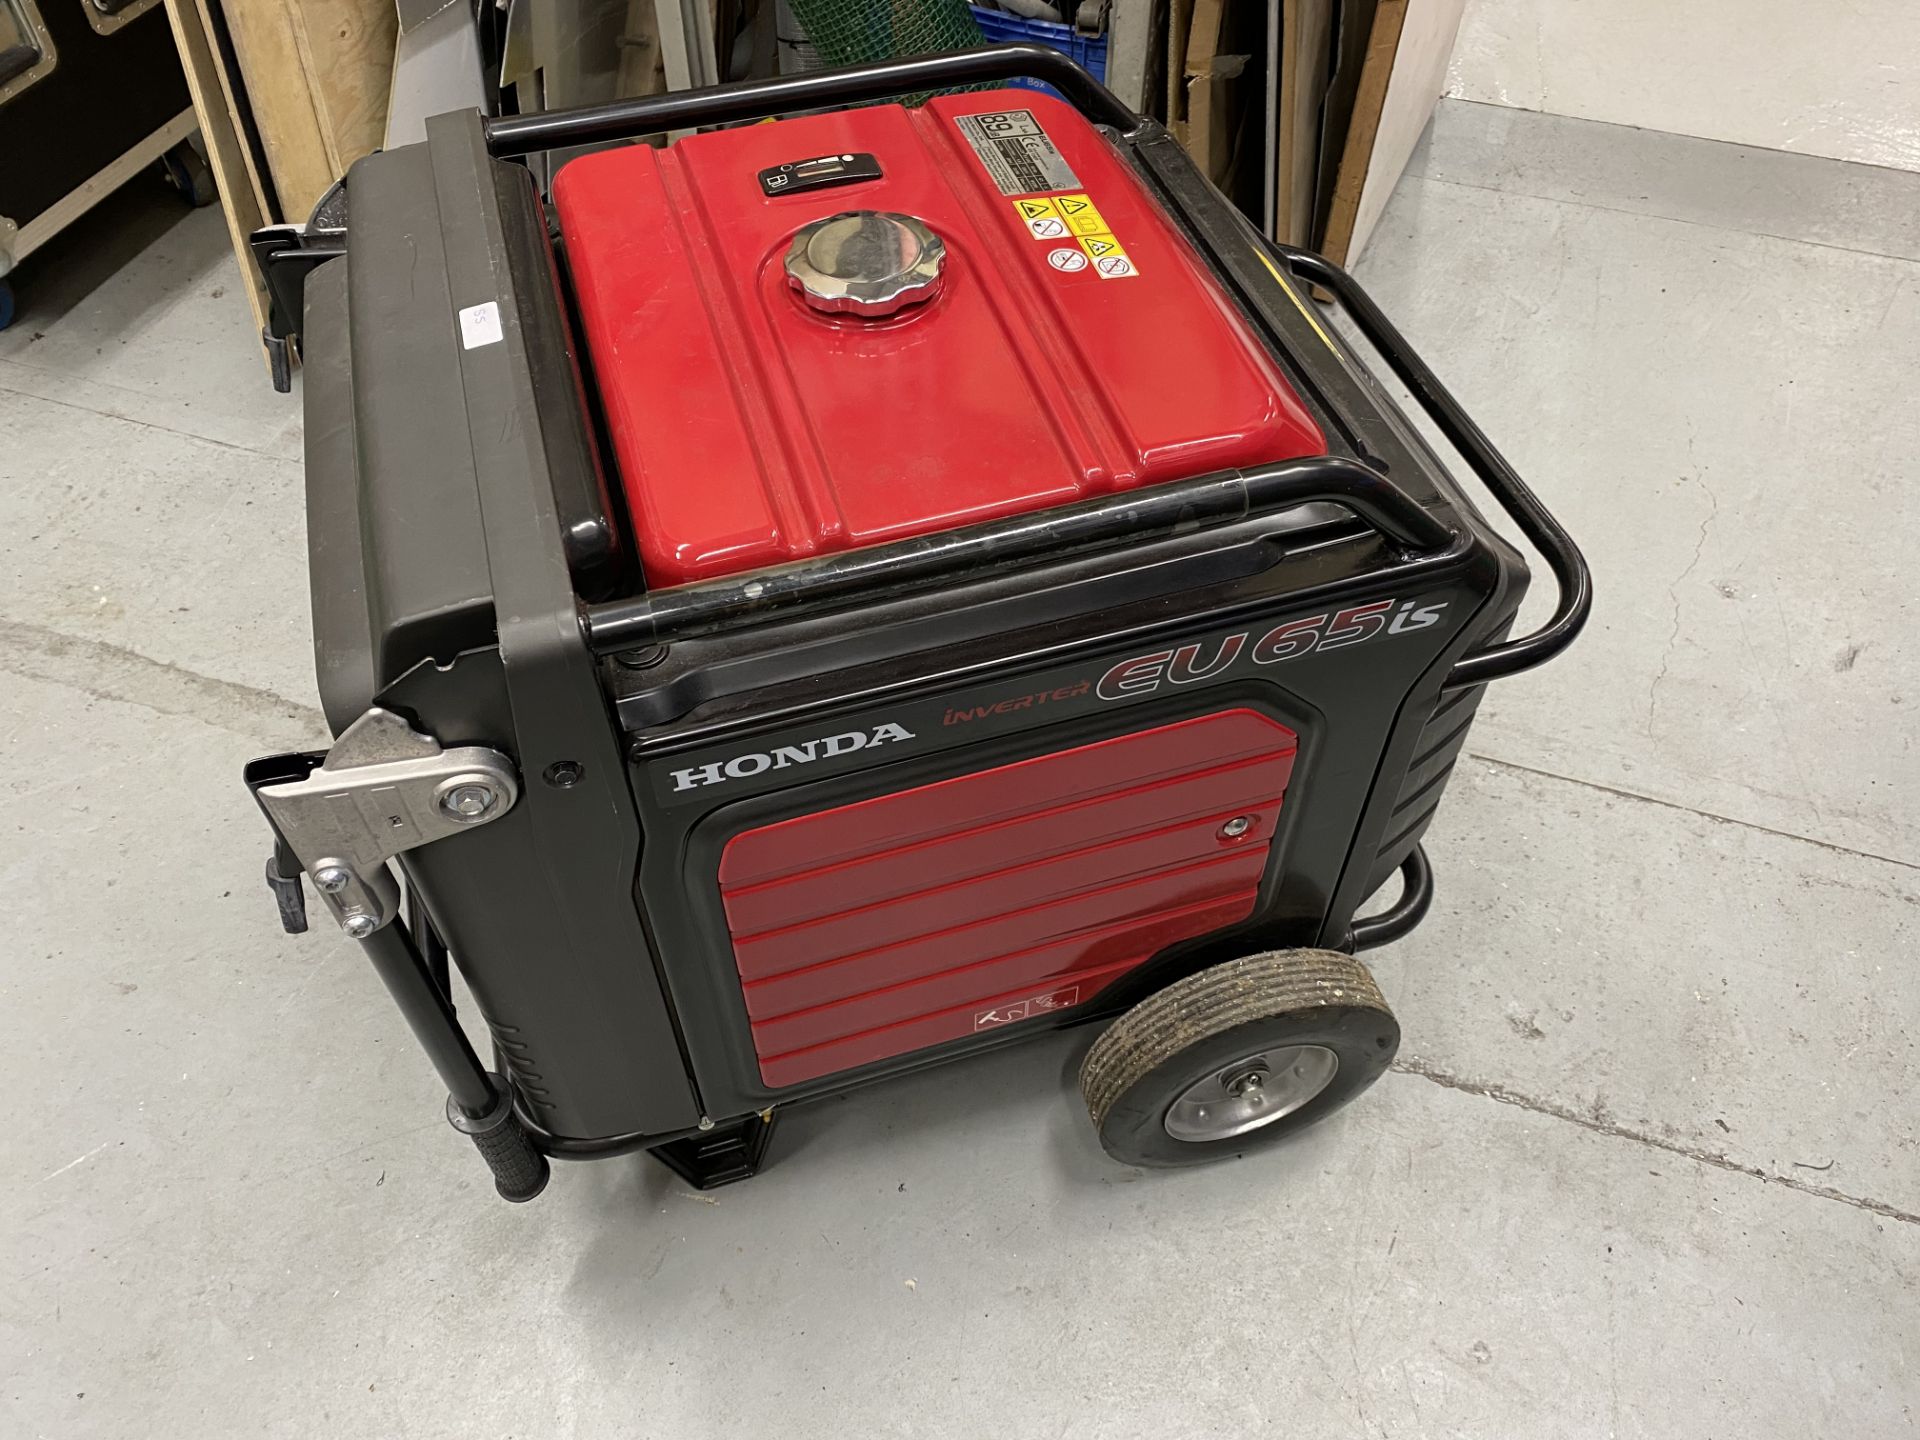 Honda EU65iS inverter mobile petrol generator, rated power 5.5kw, 230 volts, 23.9A, (2014). - Image 2 of 5